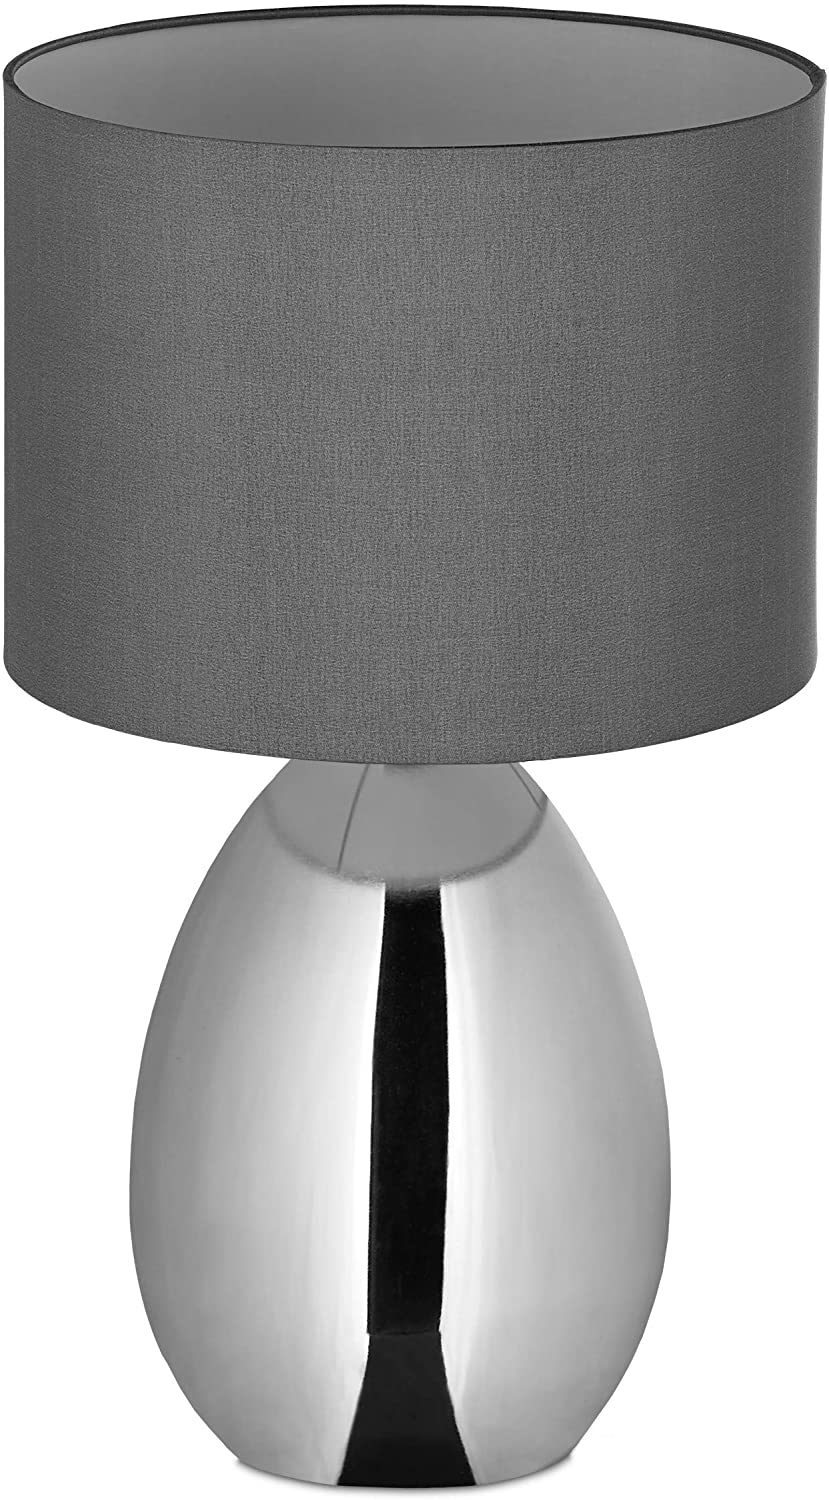 Relaxdays Bedside Lamp Touch Dimmable Modern Touch Lamp with 3 Levels E14 Table Lamp with Cable 49 x 30 cm Silver 10032219 L